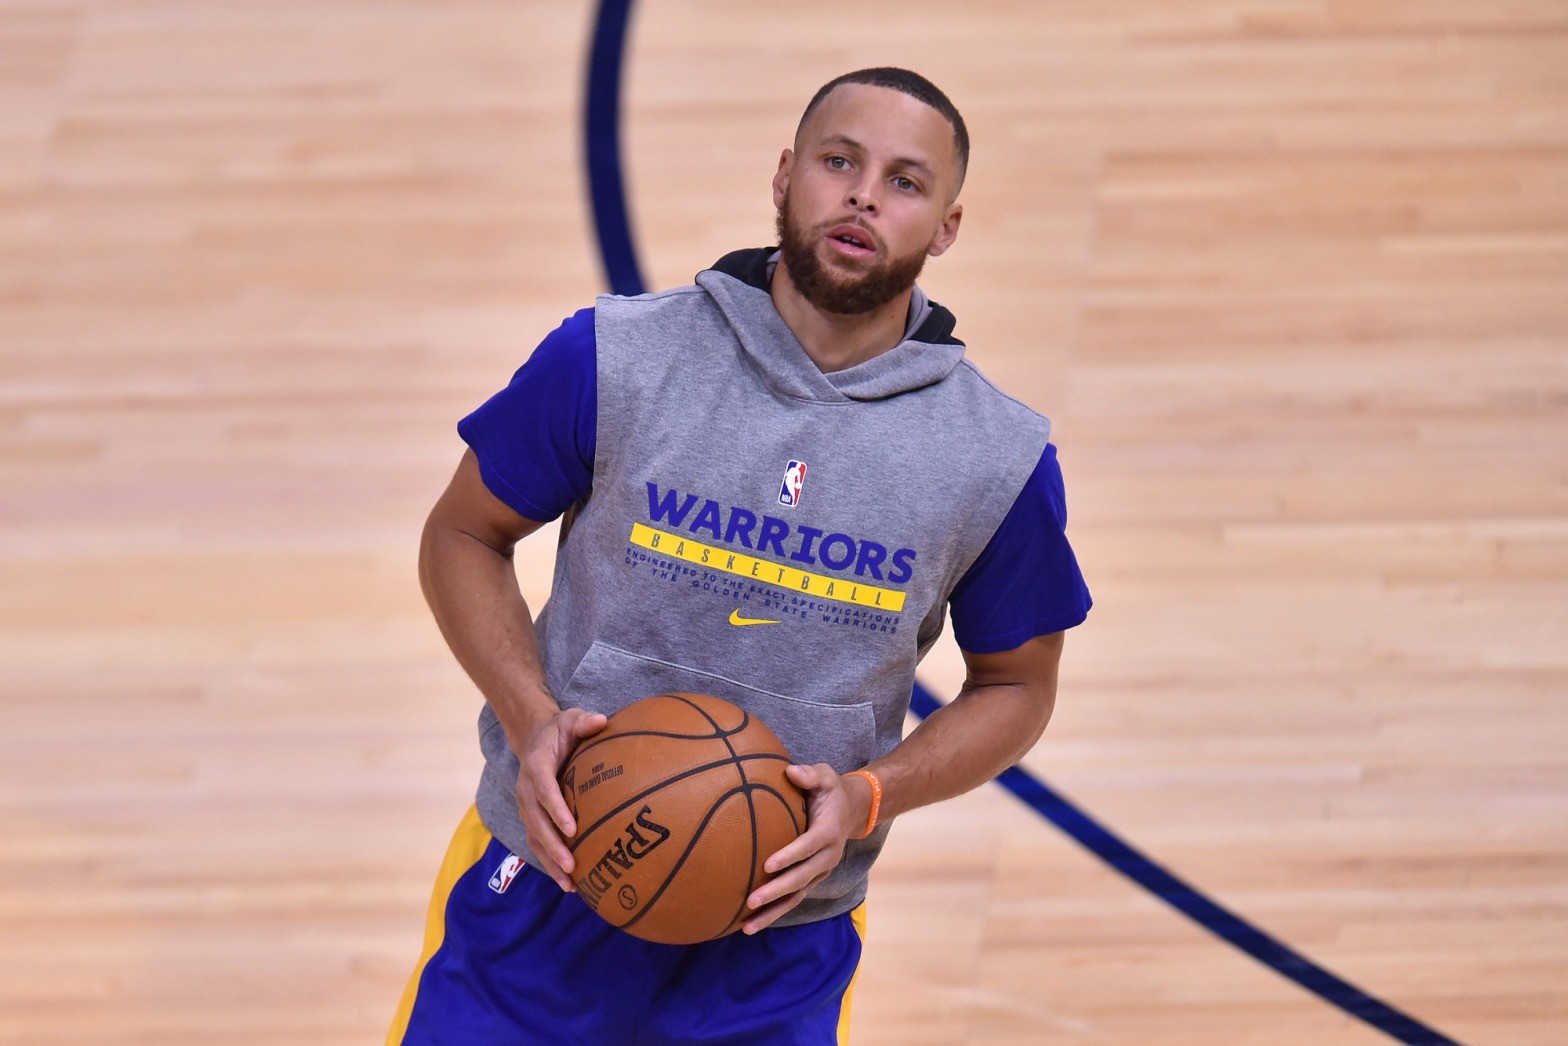 Warriors’ Steph Curry won’t play for Team USA at Tokyo Olympics